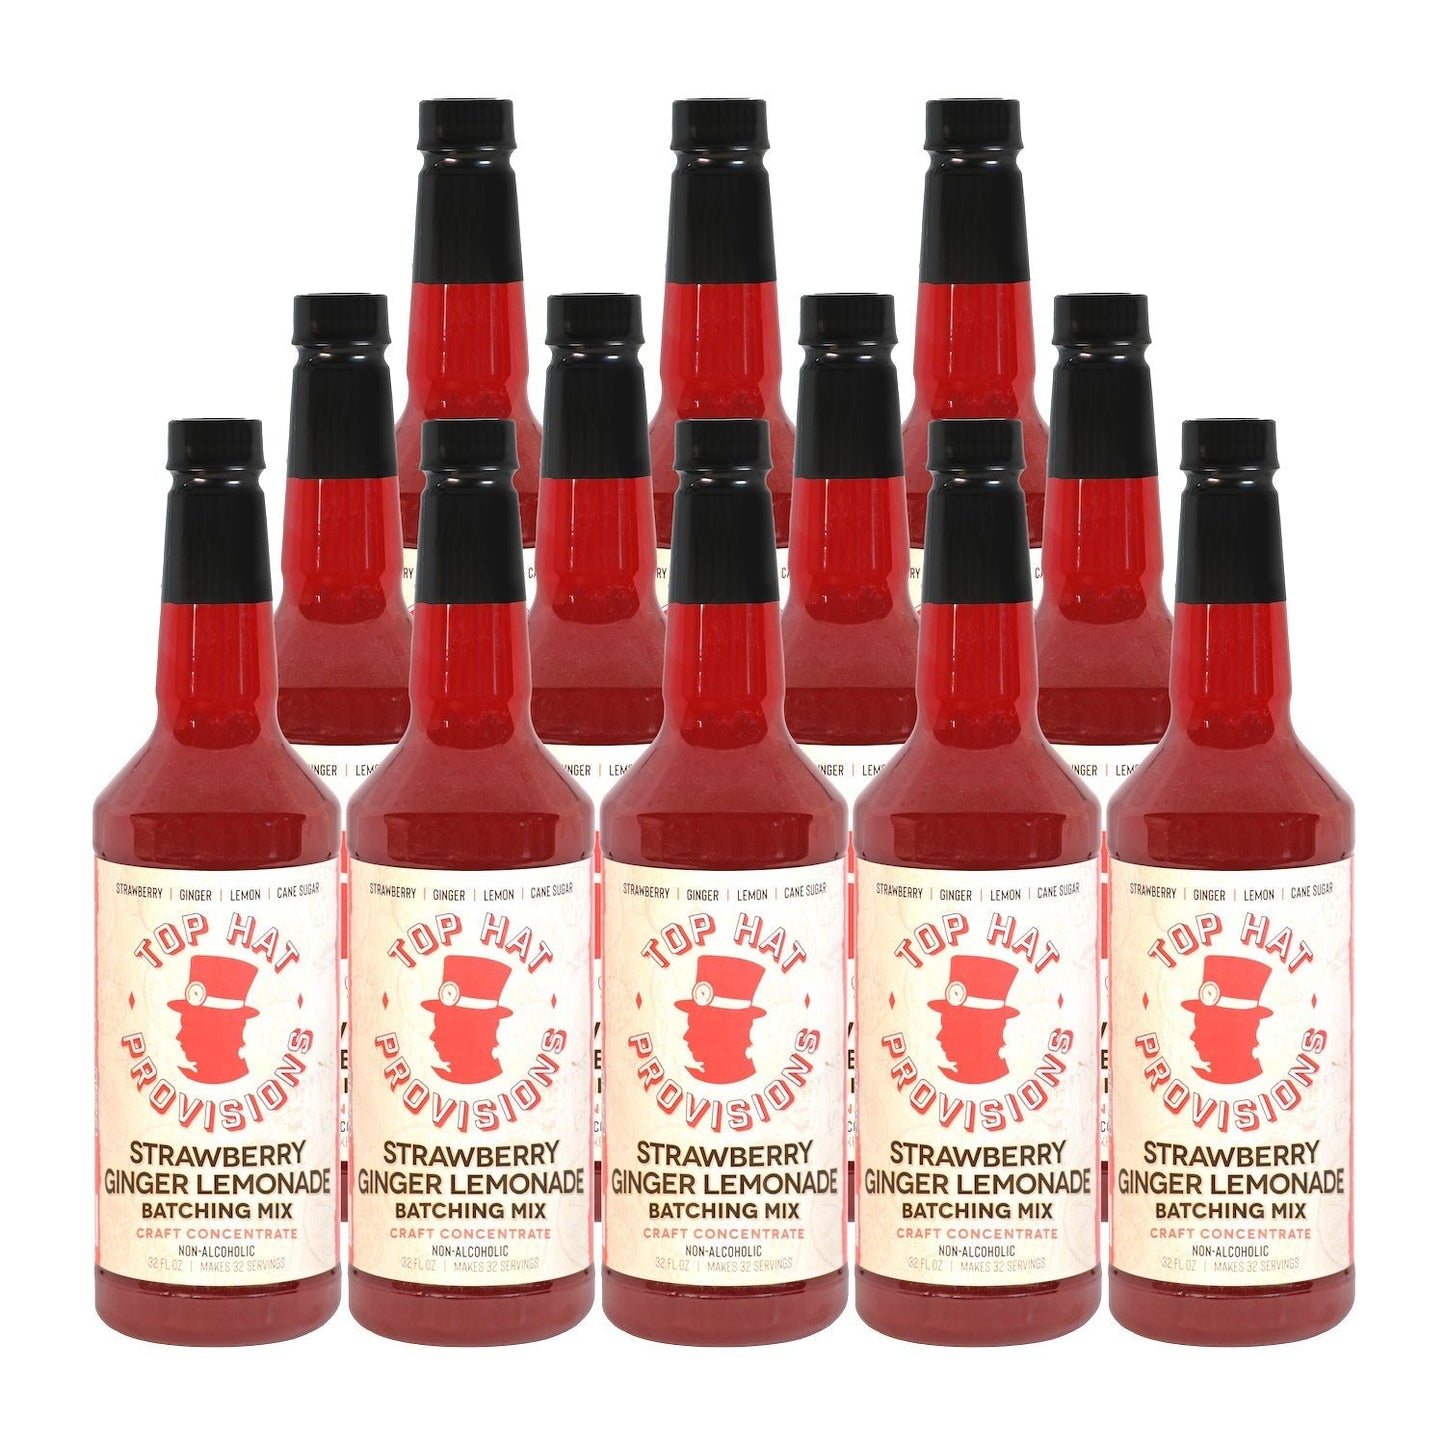 Top Hat Strawberry Ginger Lemonade Concentrate & Batching Mix - 32oz Bottle - Groove Rabbit